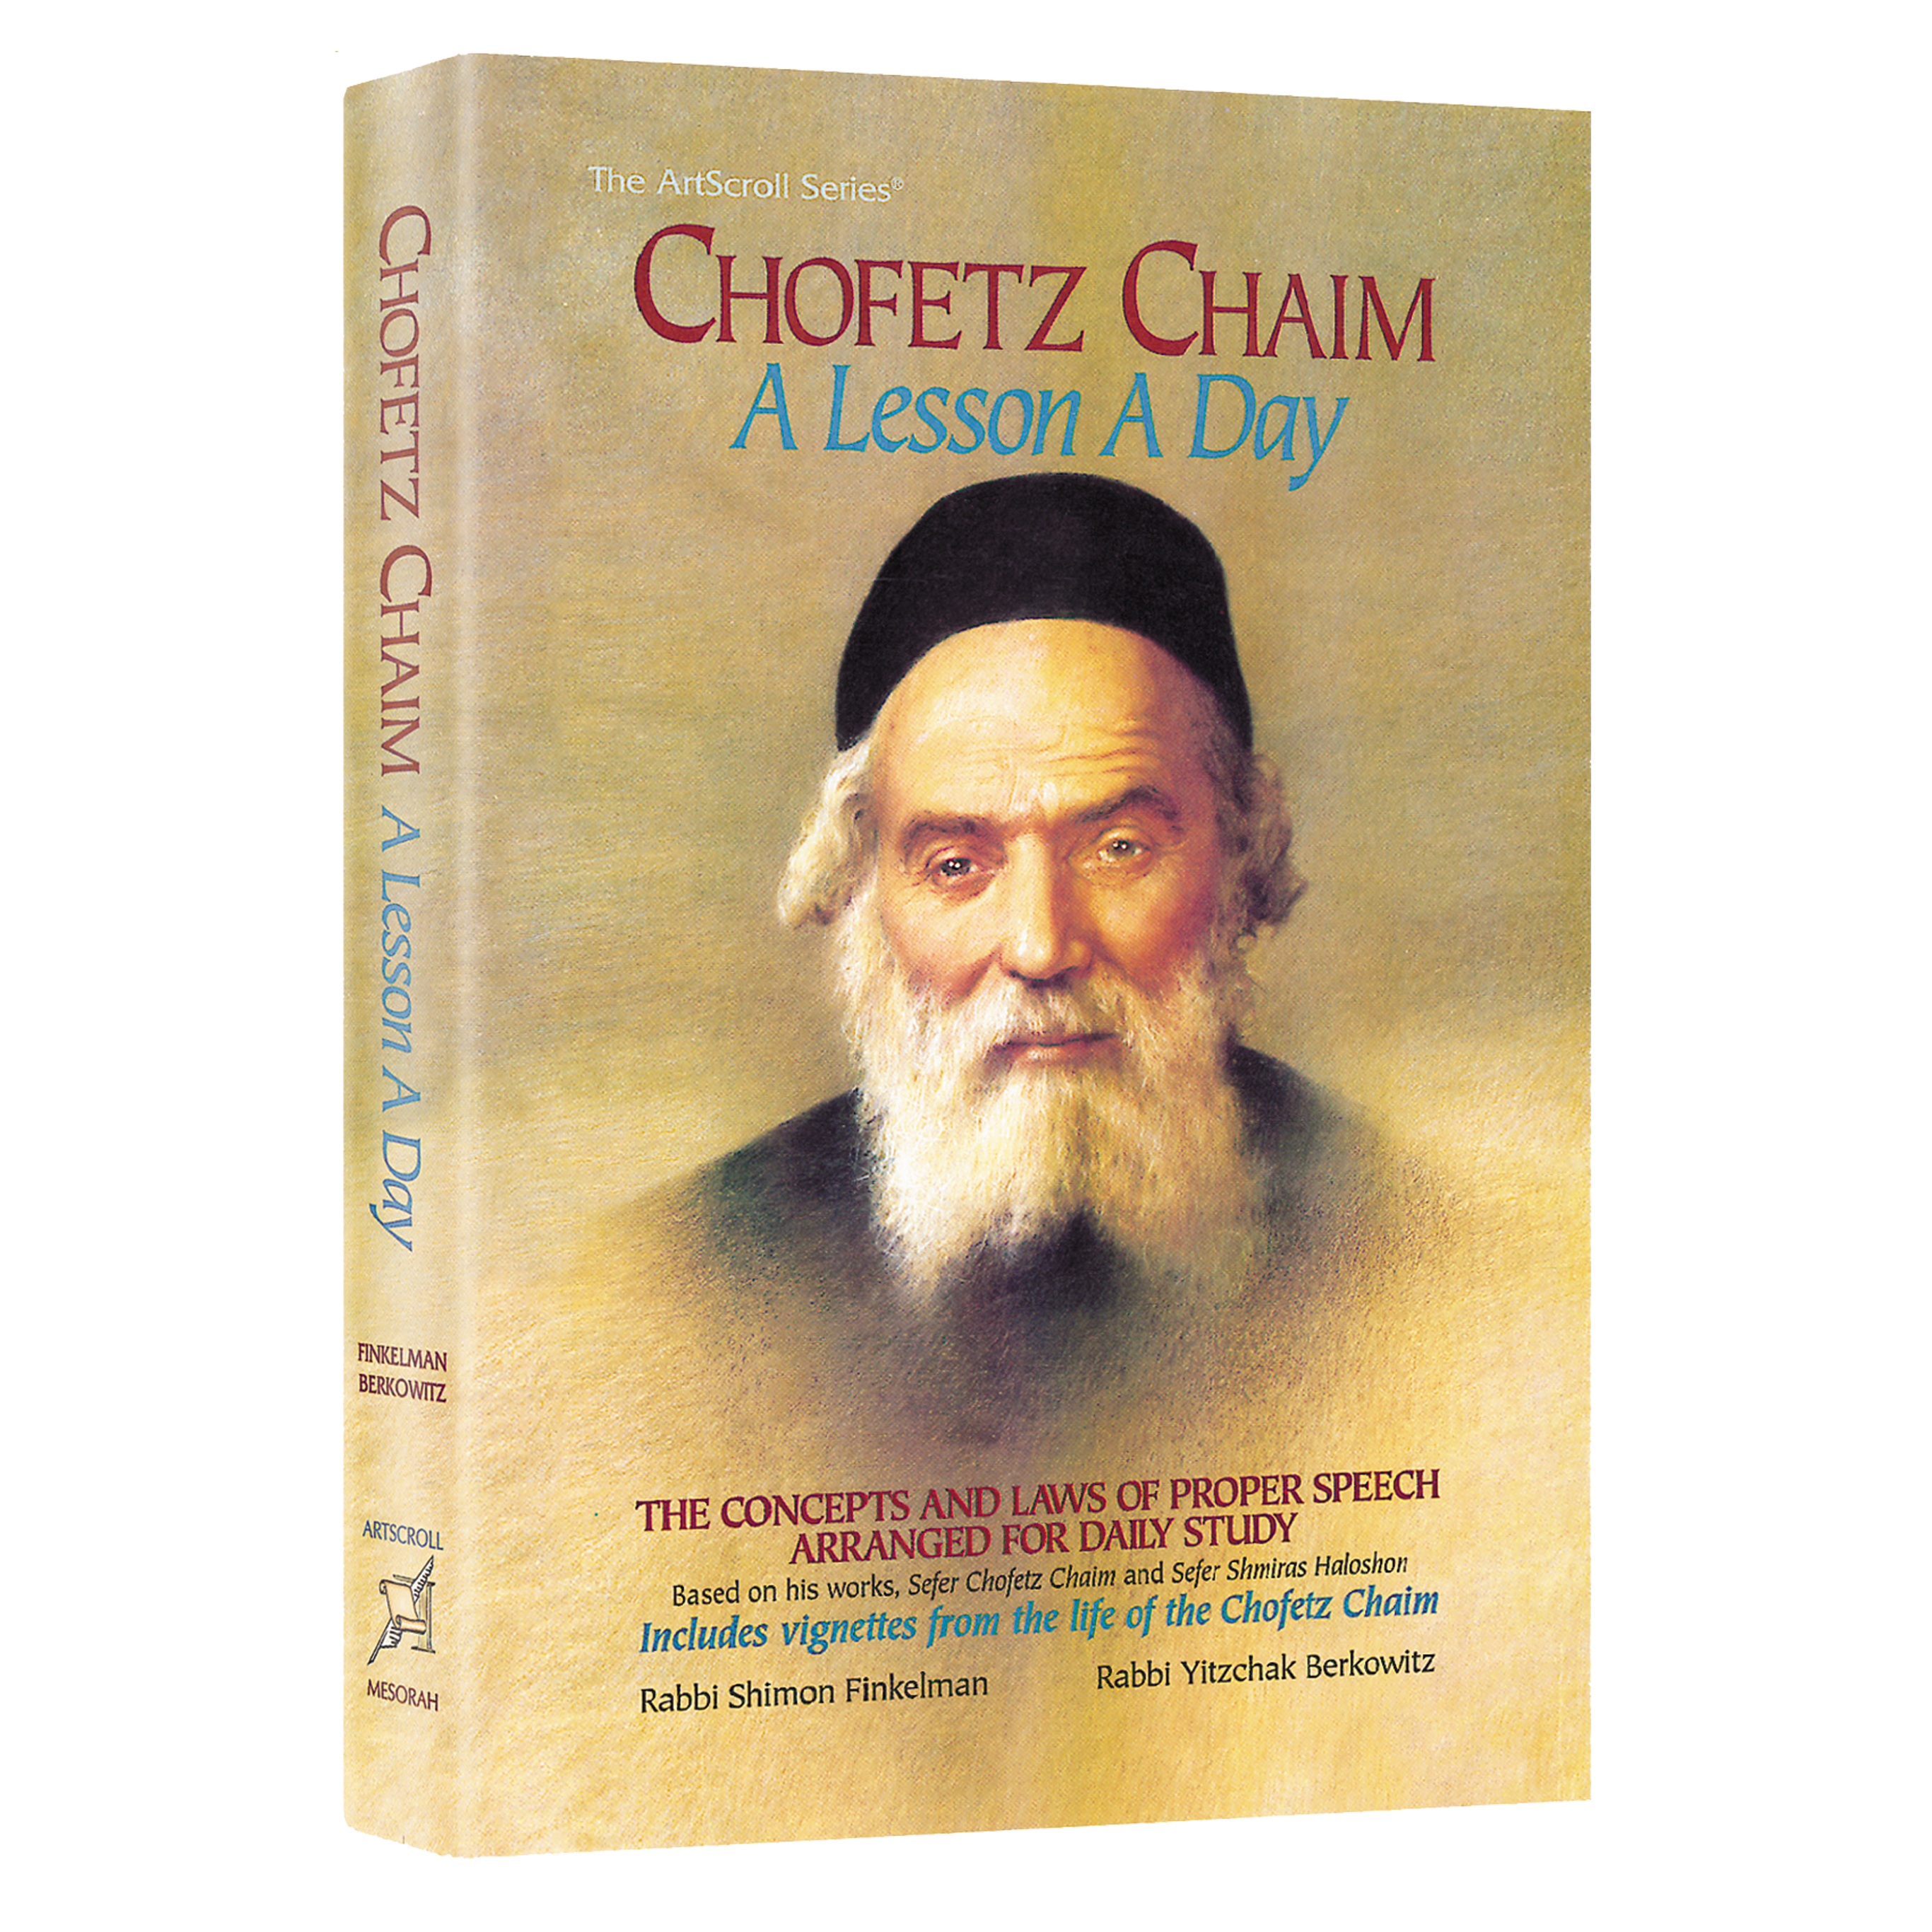 Image result for chofetz chaim a lesson a day